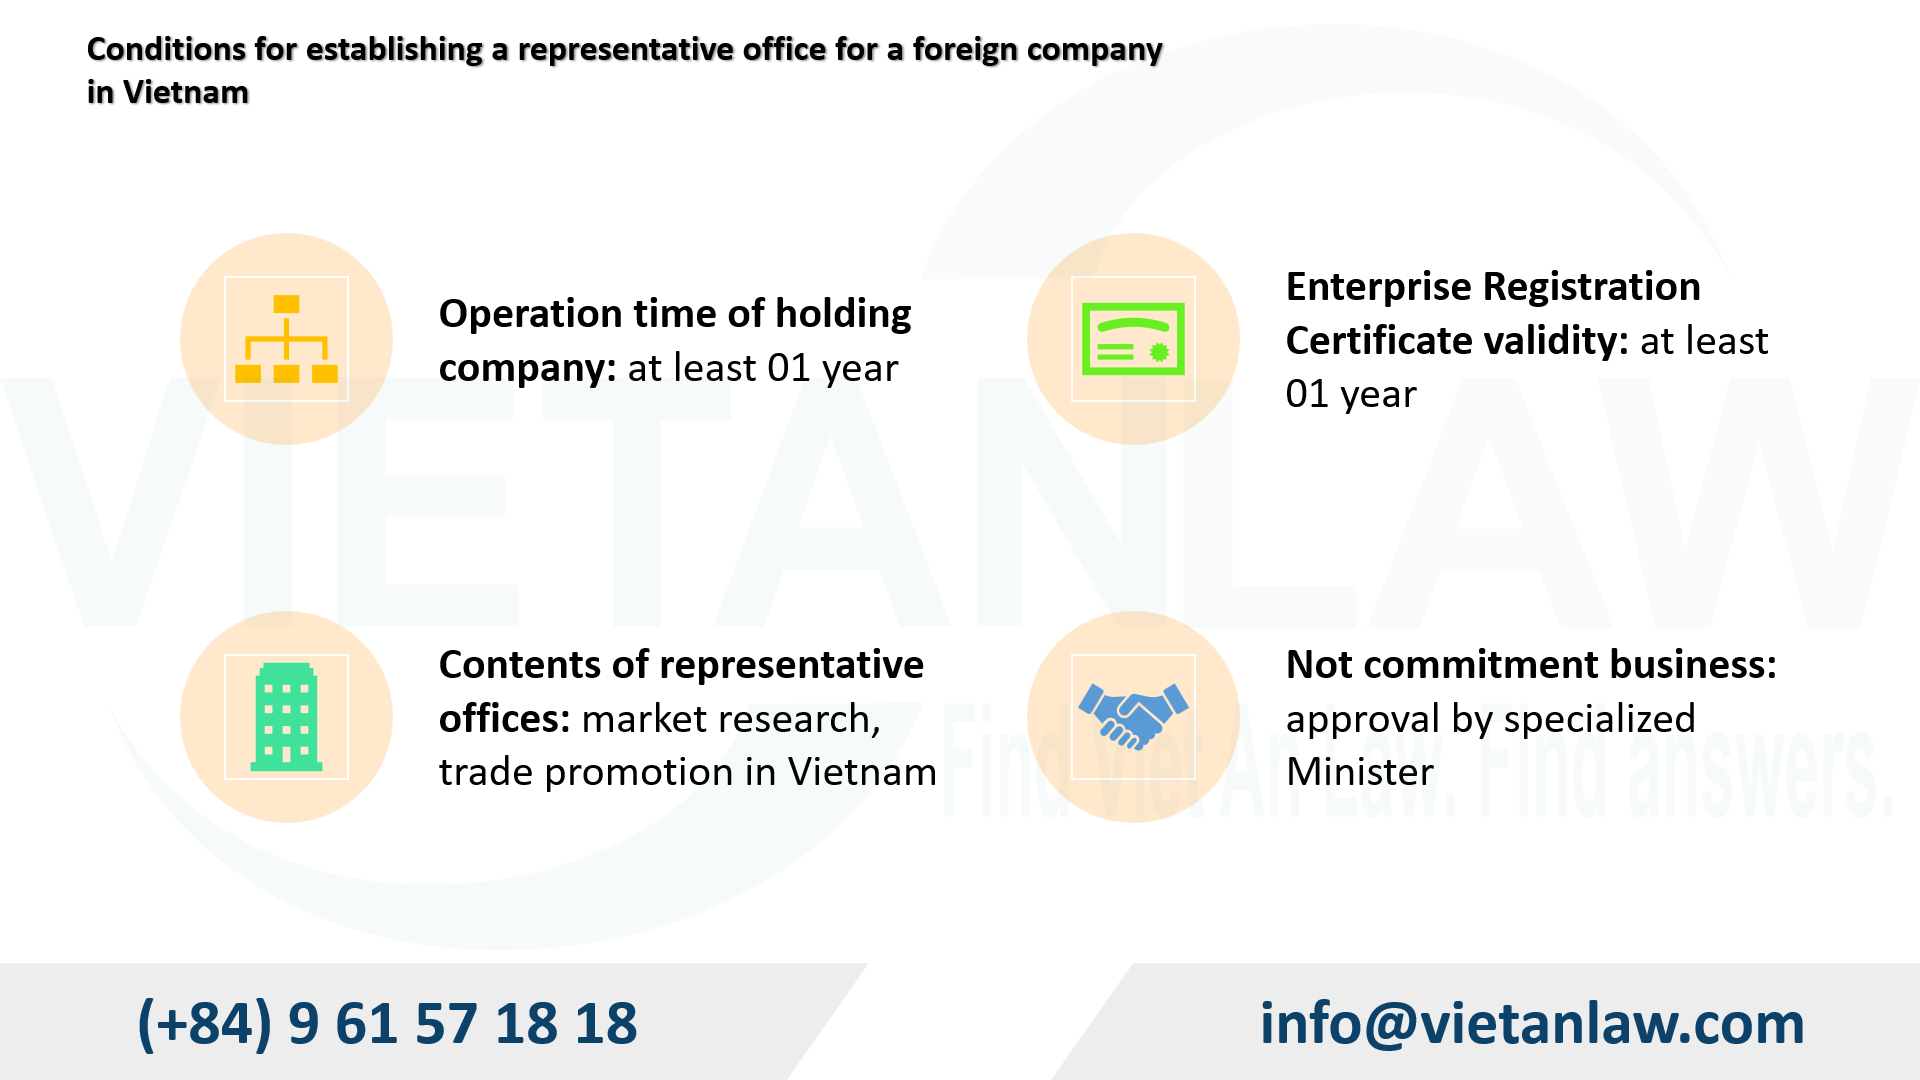 Conditions for establishing a representative office for a foreign company in Vietnam